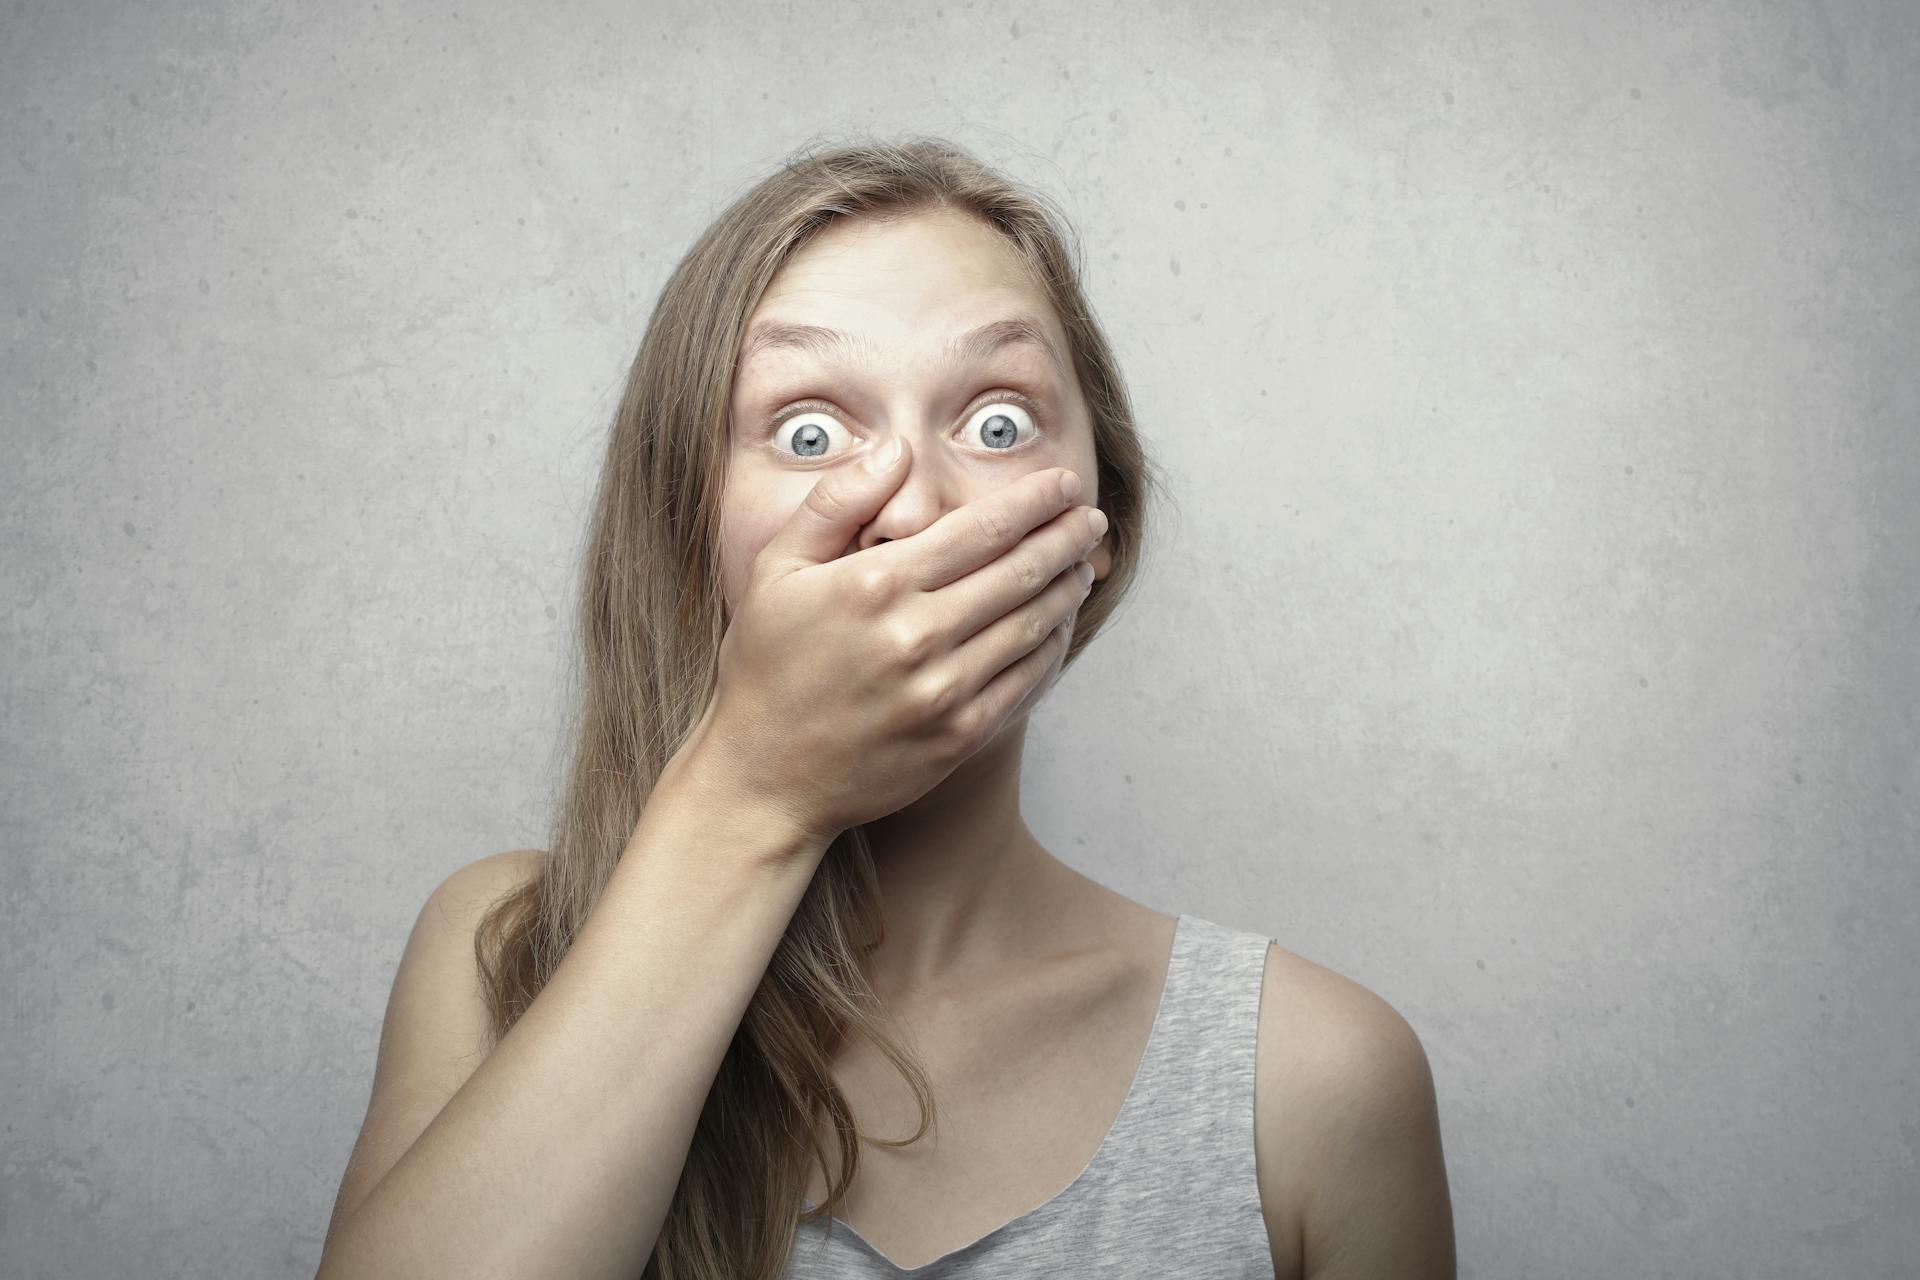 A shocked woman covering her mouth with her hand | Source: Pexels